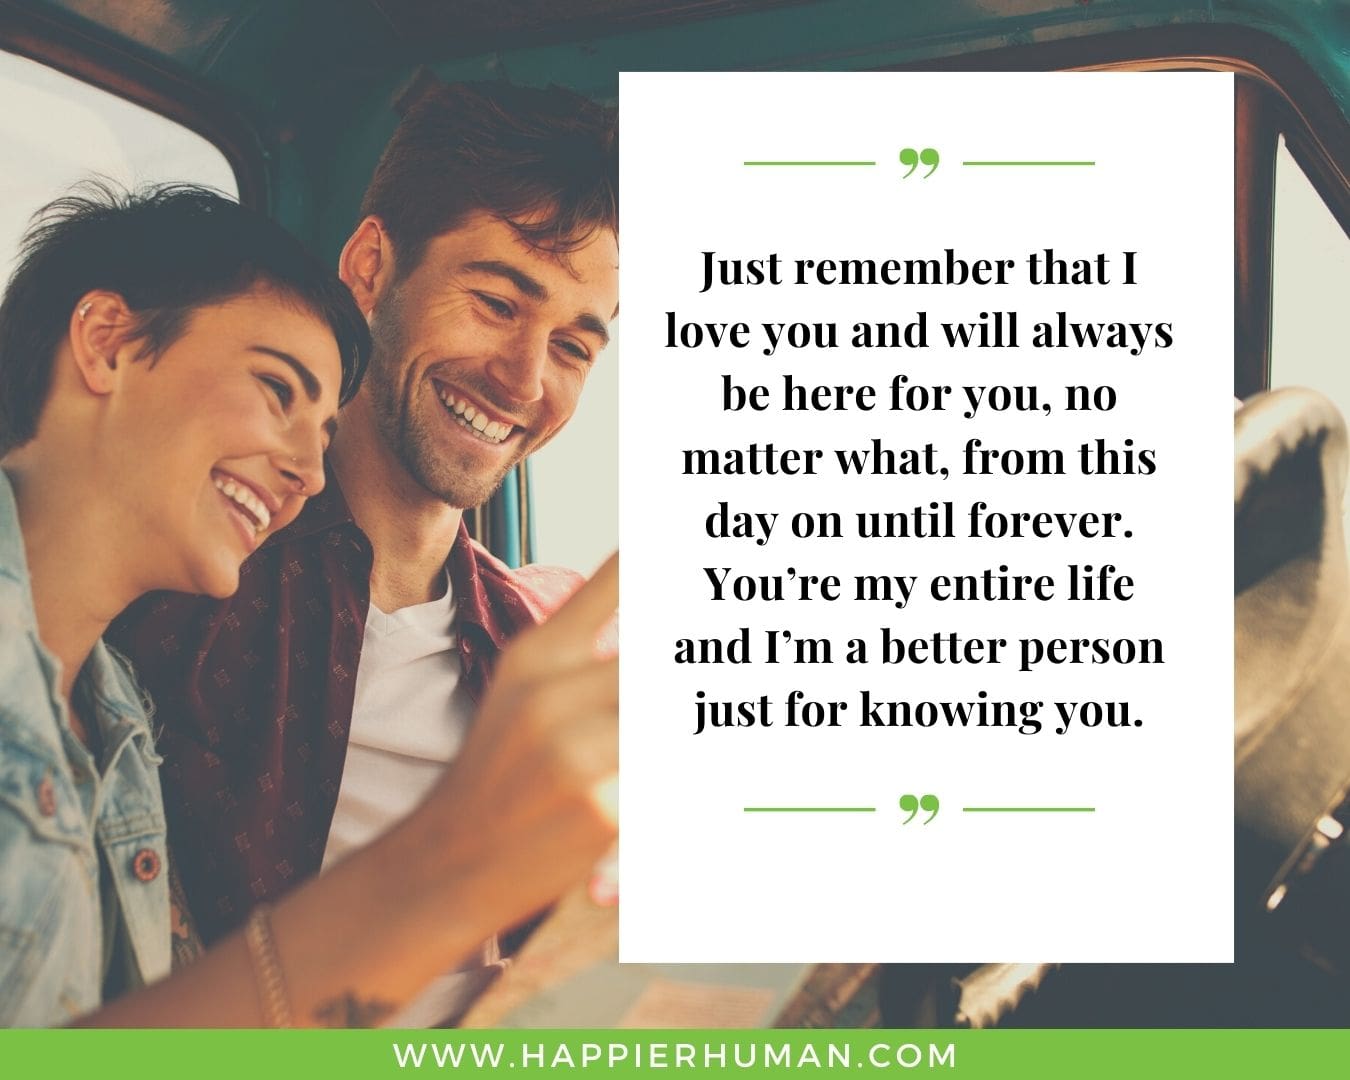 I’m Here for You Quotes - “Just remember that I love you and will always be here for you, no matter what, from this day on until forever. You’re my entire life and I’m a better person just for knowing you.”